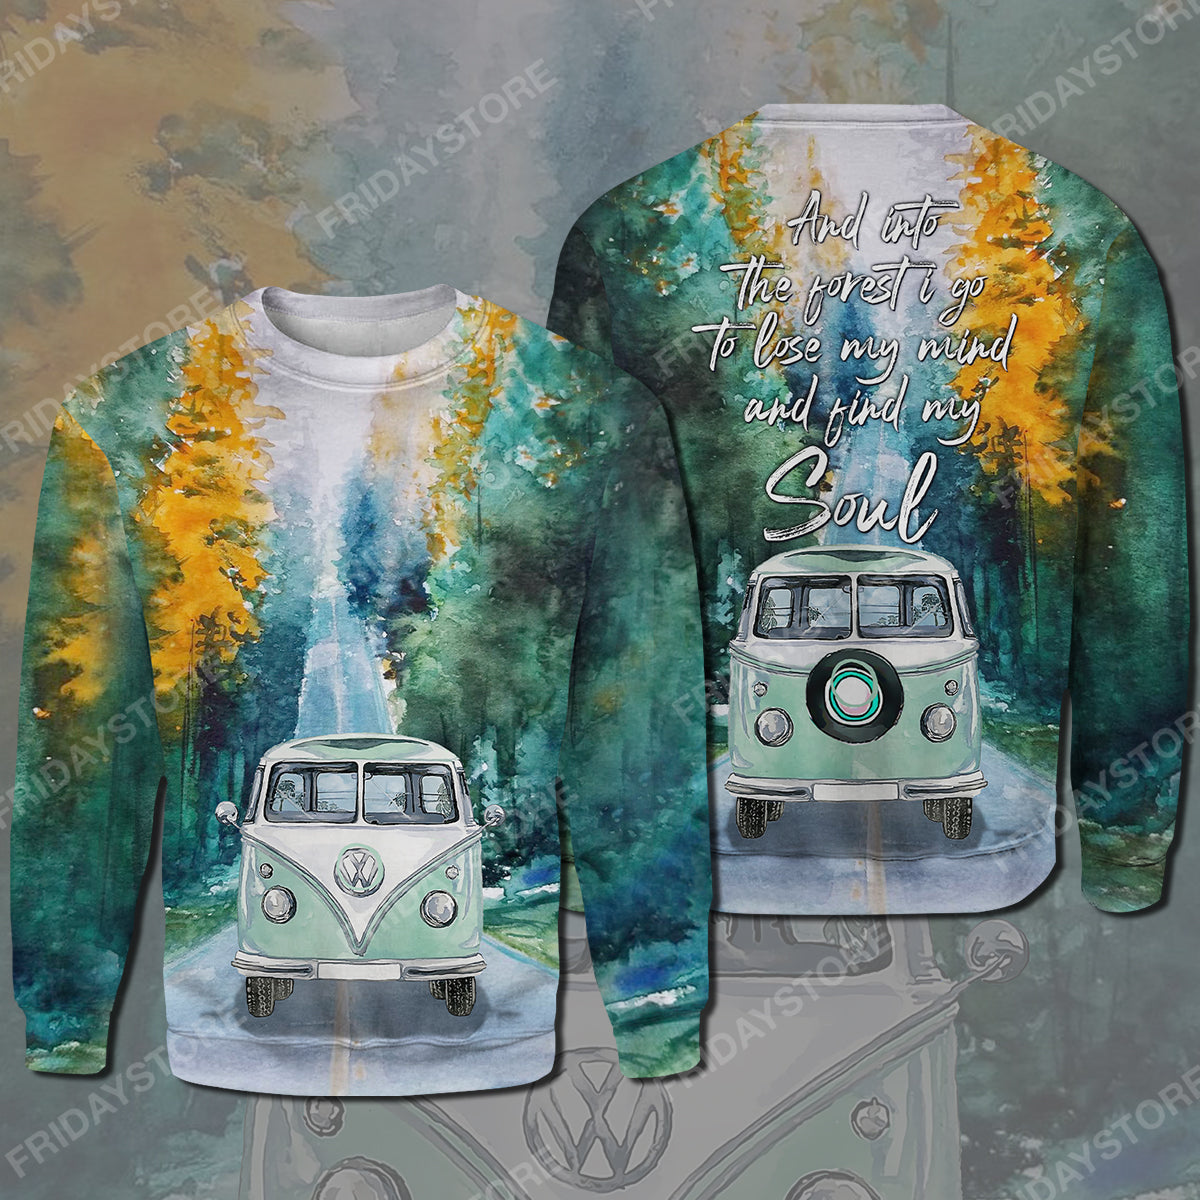 Unifinz Hippie T-shirt And Into The Forest I Go Camping T-shirt Amazing High Quality Hippie Hoodie Sweater Tank 2023